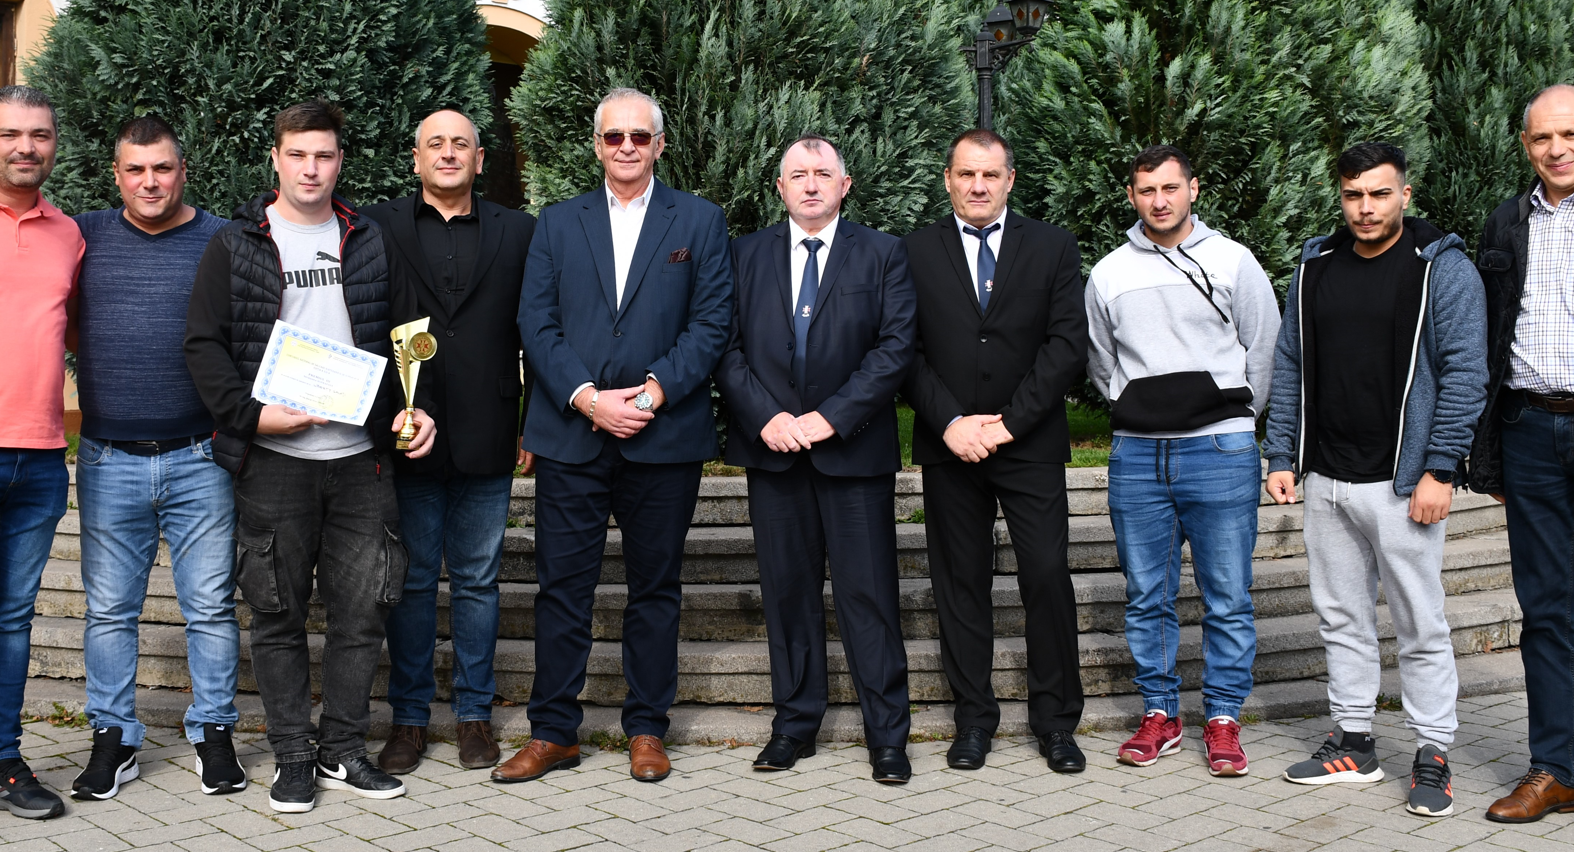 LIBERTY Galati team gains a podium place at National Mining & Surface Rescue Competition